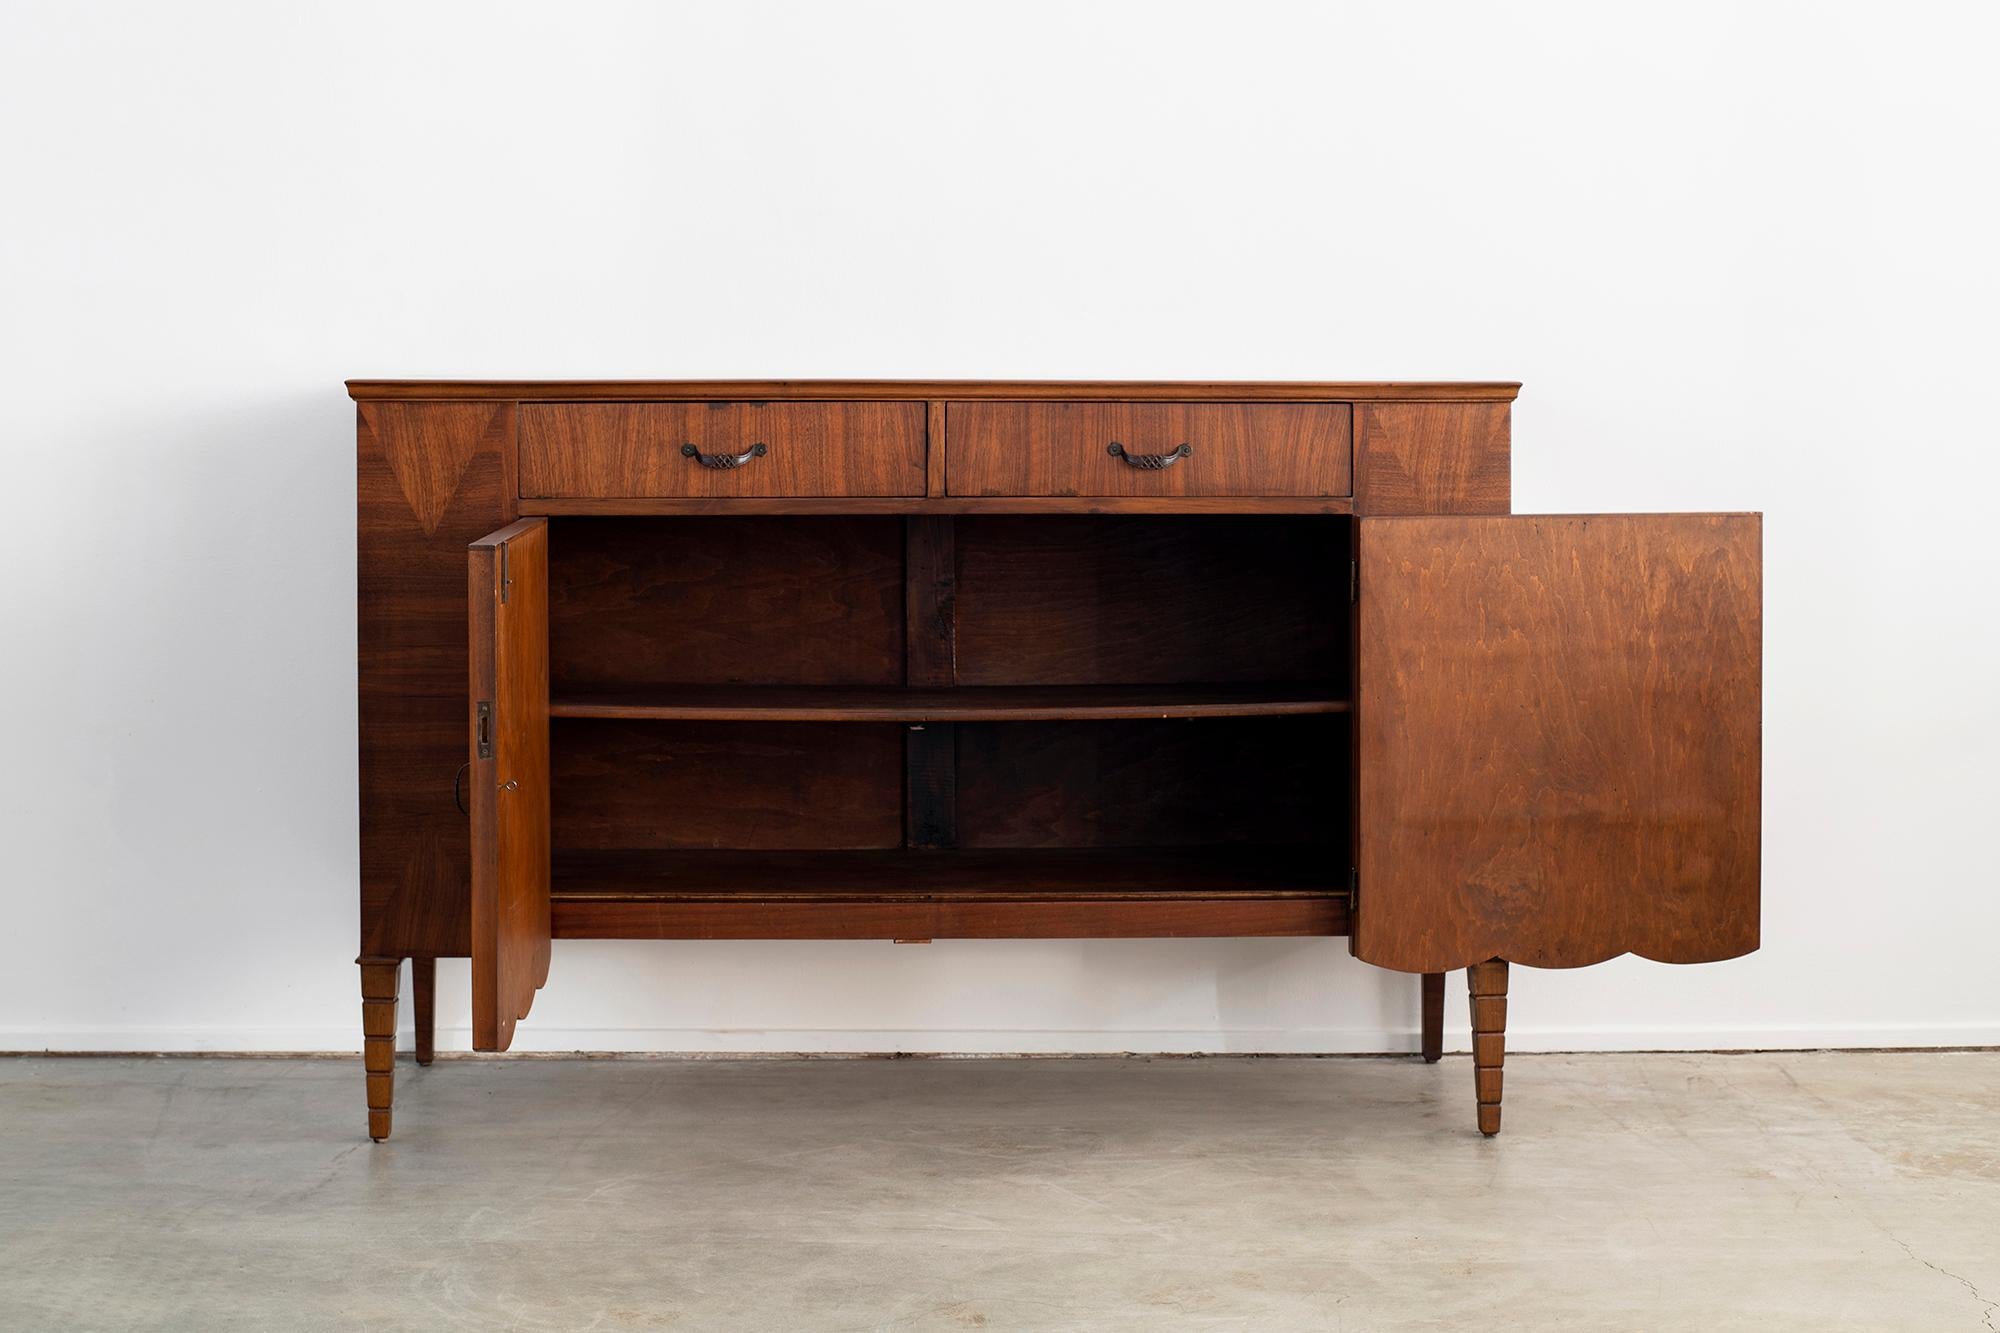 Stunning sideboard attributed to Gio Ponti, circa 1930s
Intricate wood inlay and pattern to the wood with scalloped edged bottom
Ornately carved tapered legs
Original hardware and key
2 cabinet doors open to reveal shelves and 2 upper